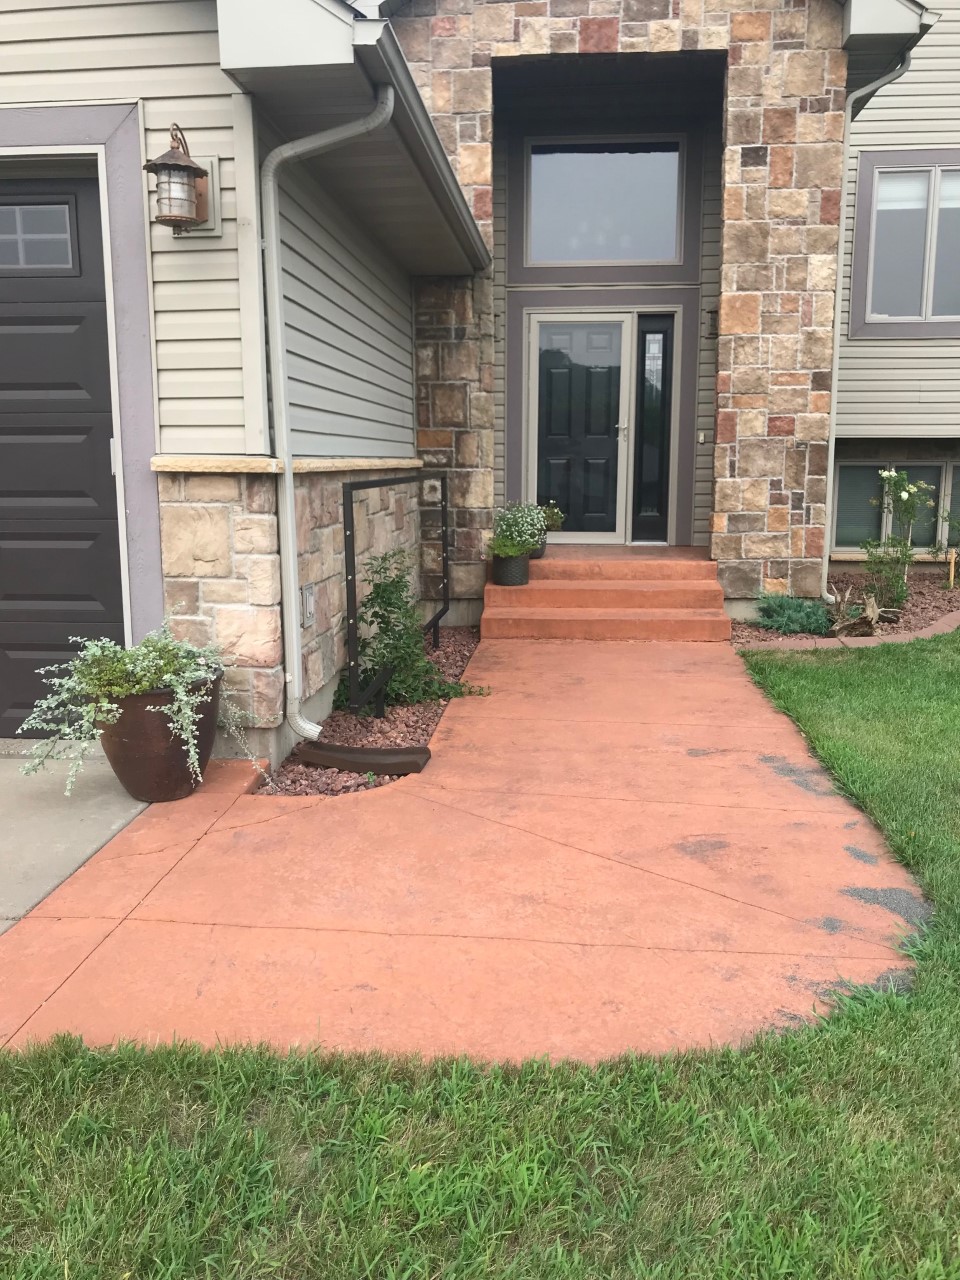 Faded Residential Concrete Walkway Porch